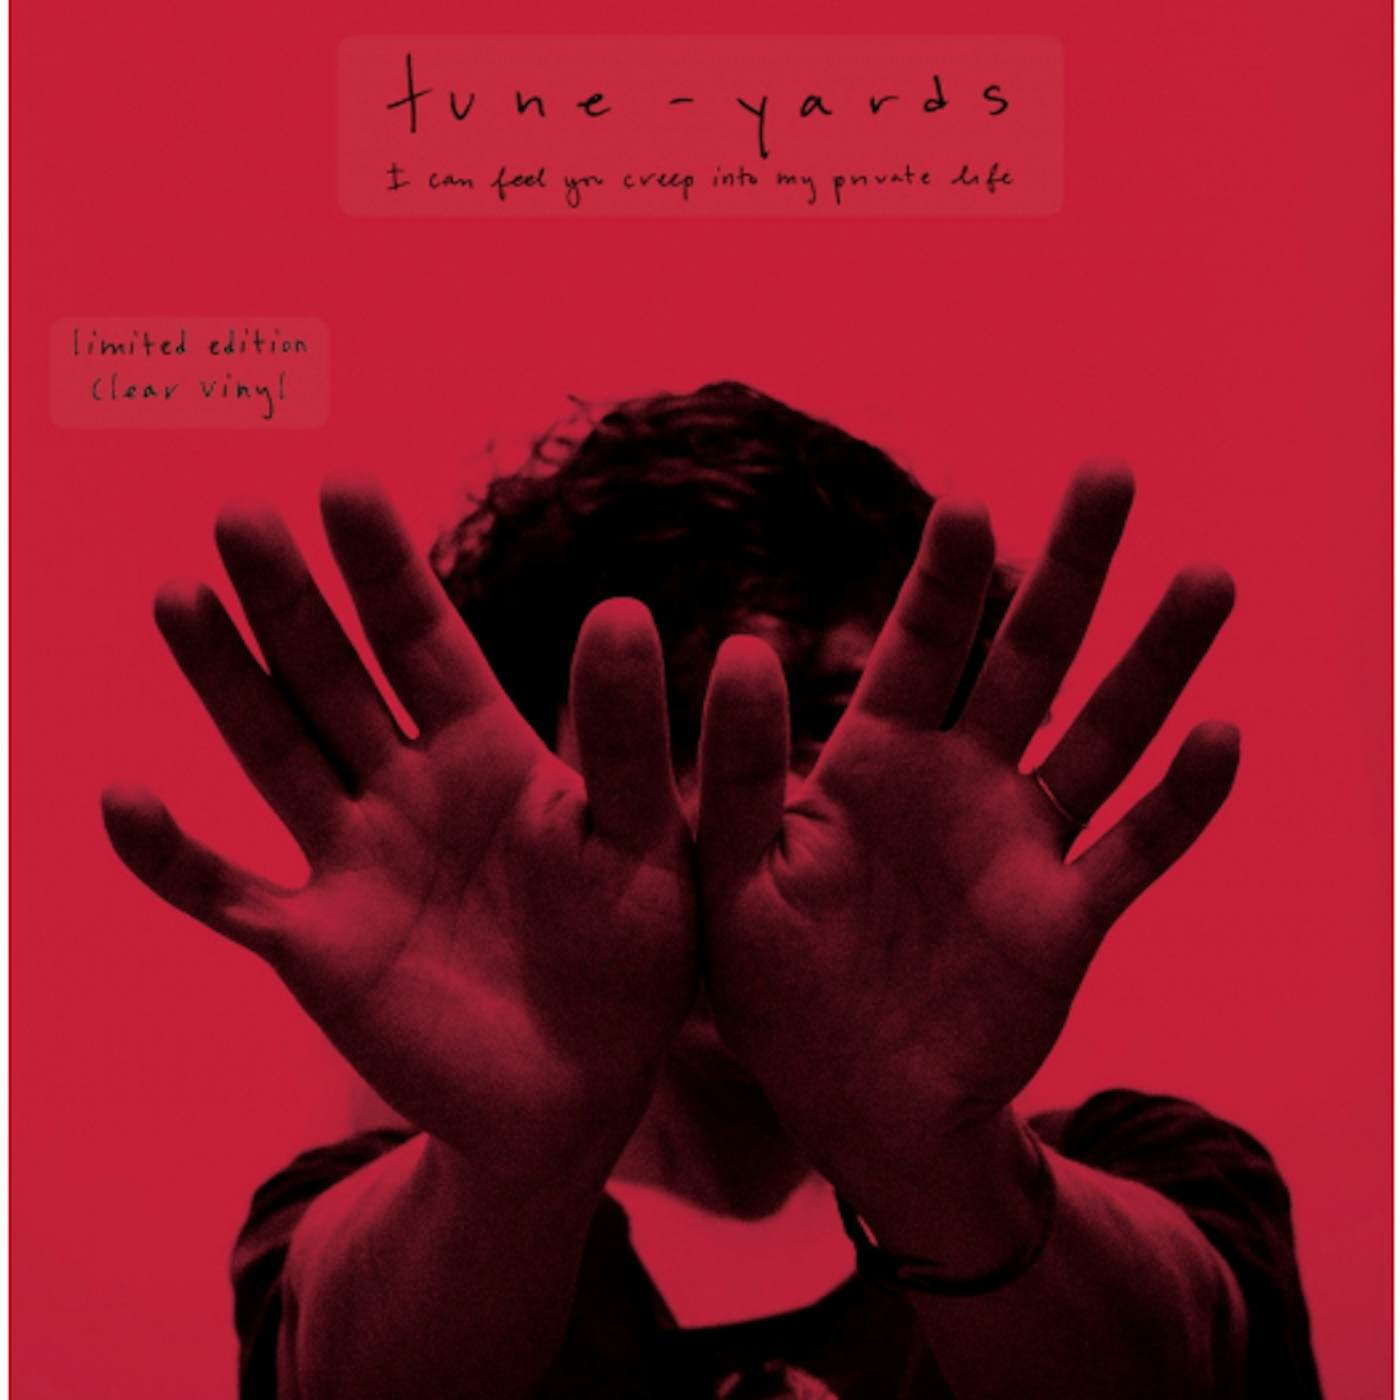 Tune-Yards I Can Feel You Creep Into My Private Life Vinyl Record